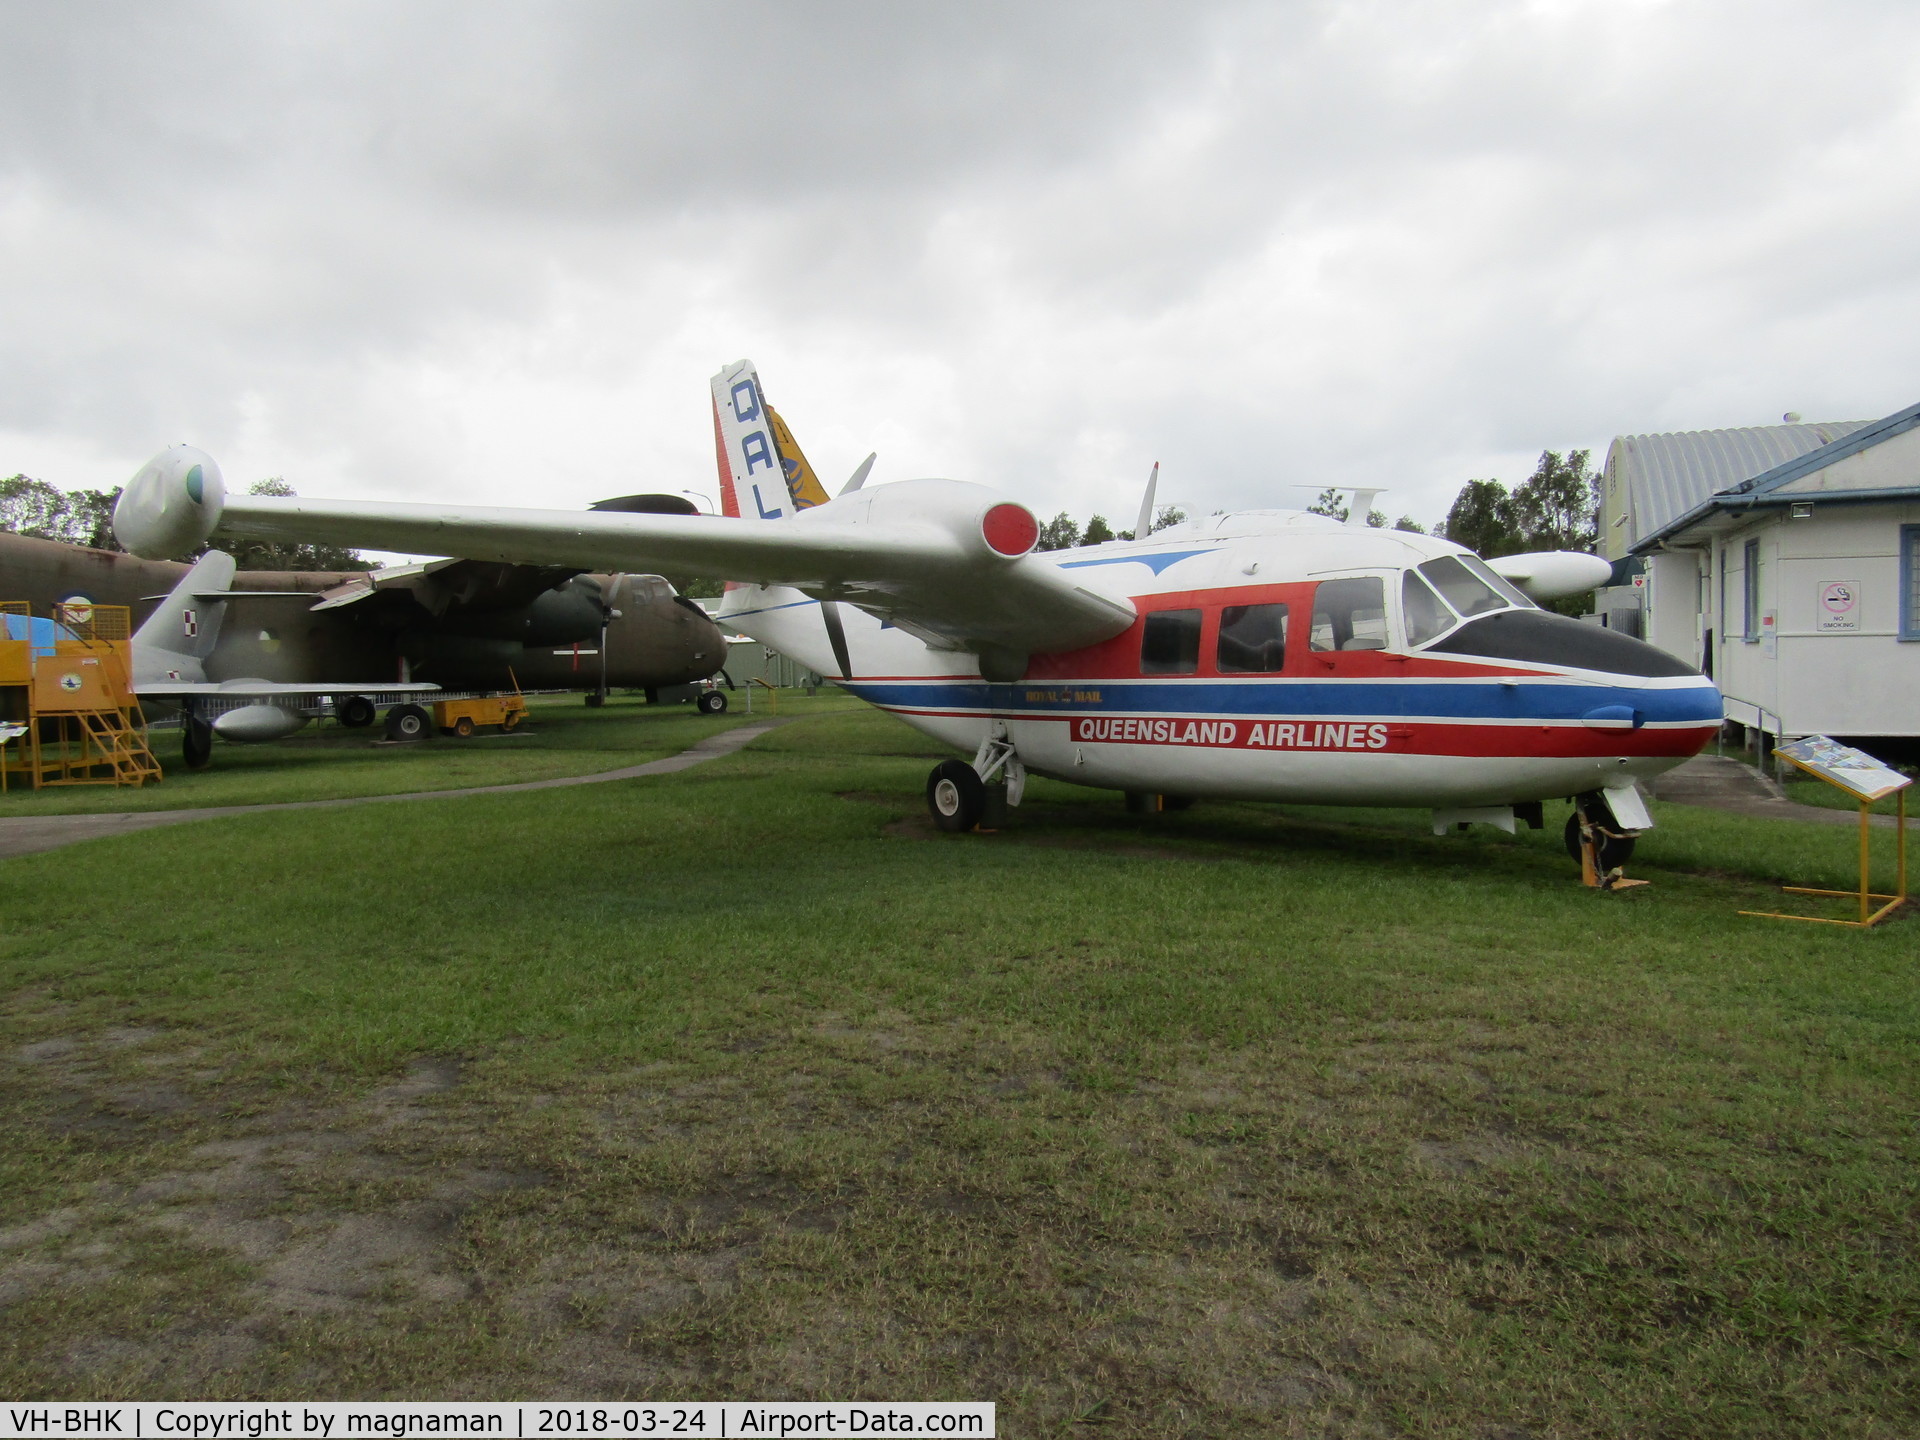 VH-BHK, 1960 Piaggio P-166AL-1 C/N 370, Also saw VH-BHK piper on same trip!! - This is at Caloundra Museum